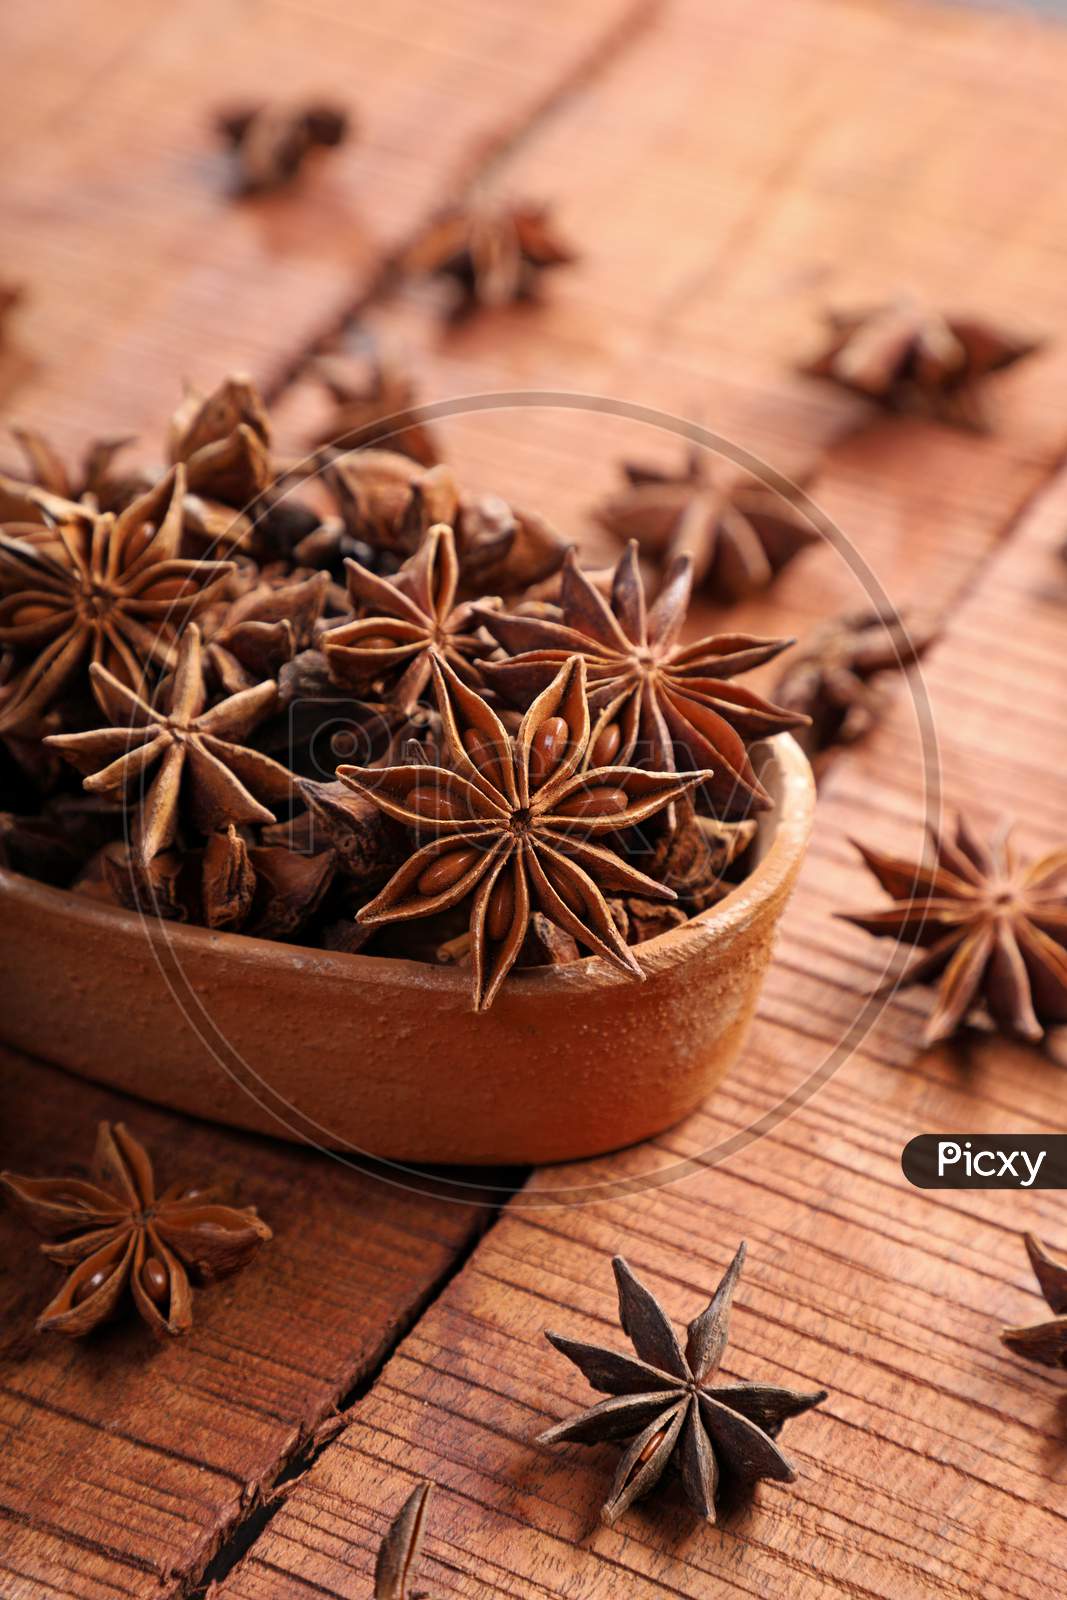 Organic Indian Spice / Herb Star Anise In A Brown Bowl